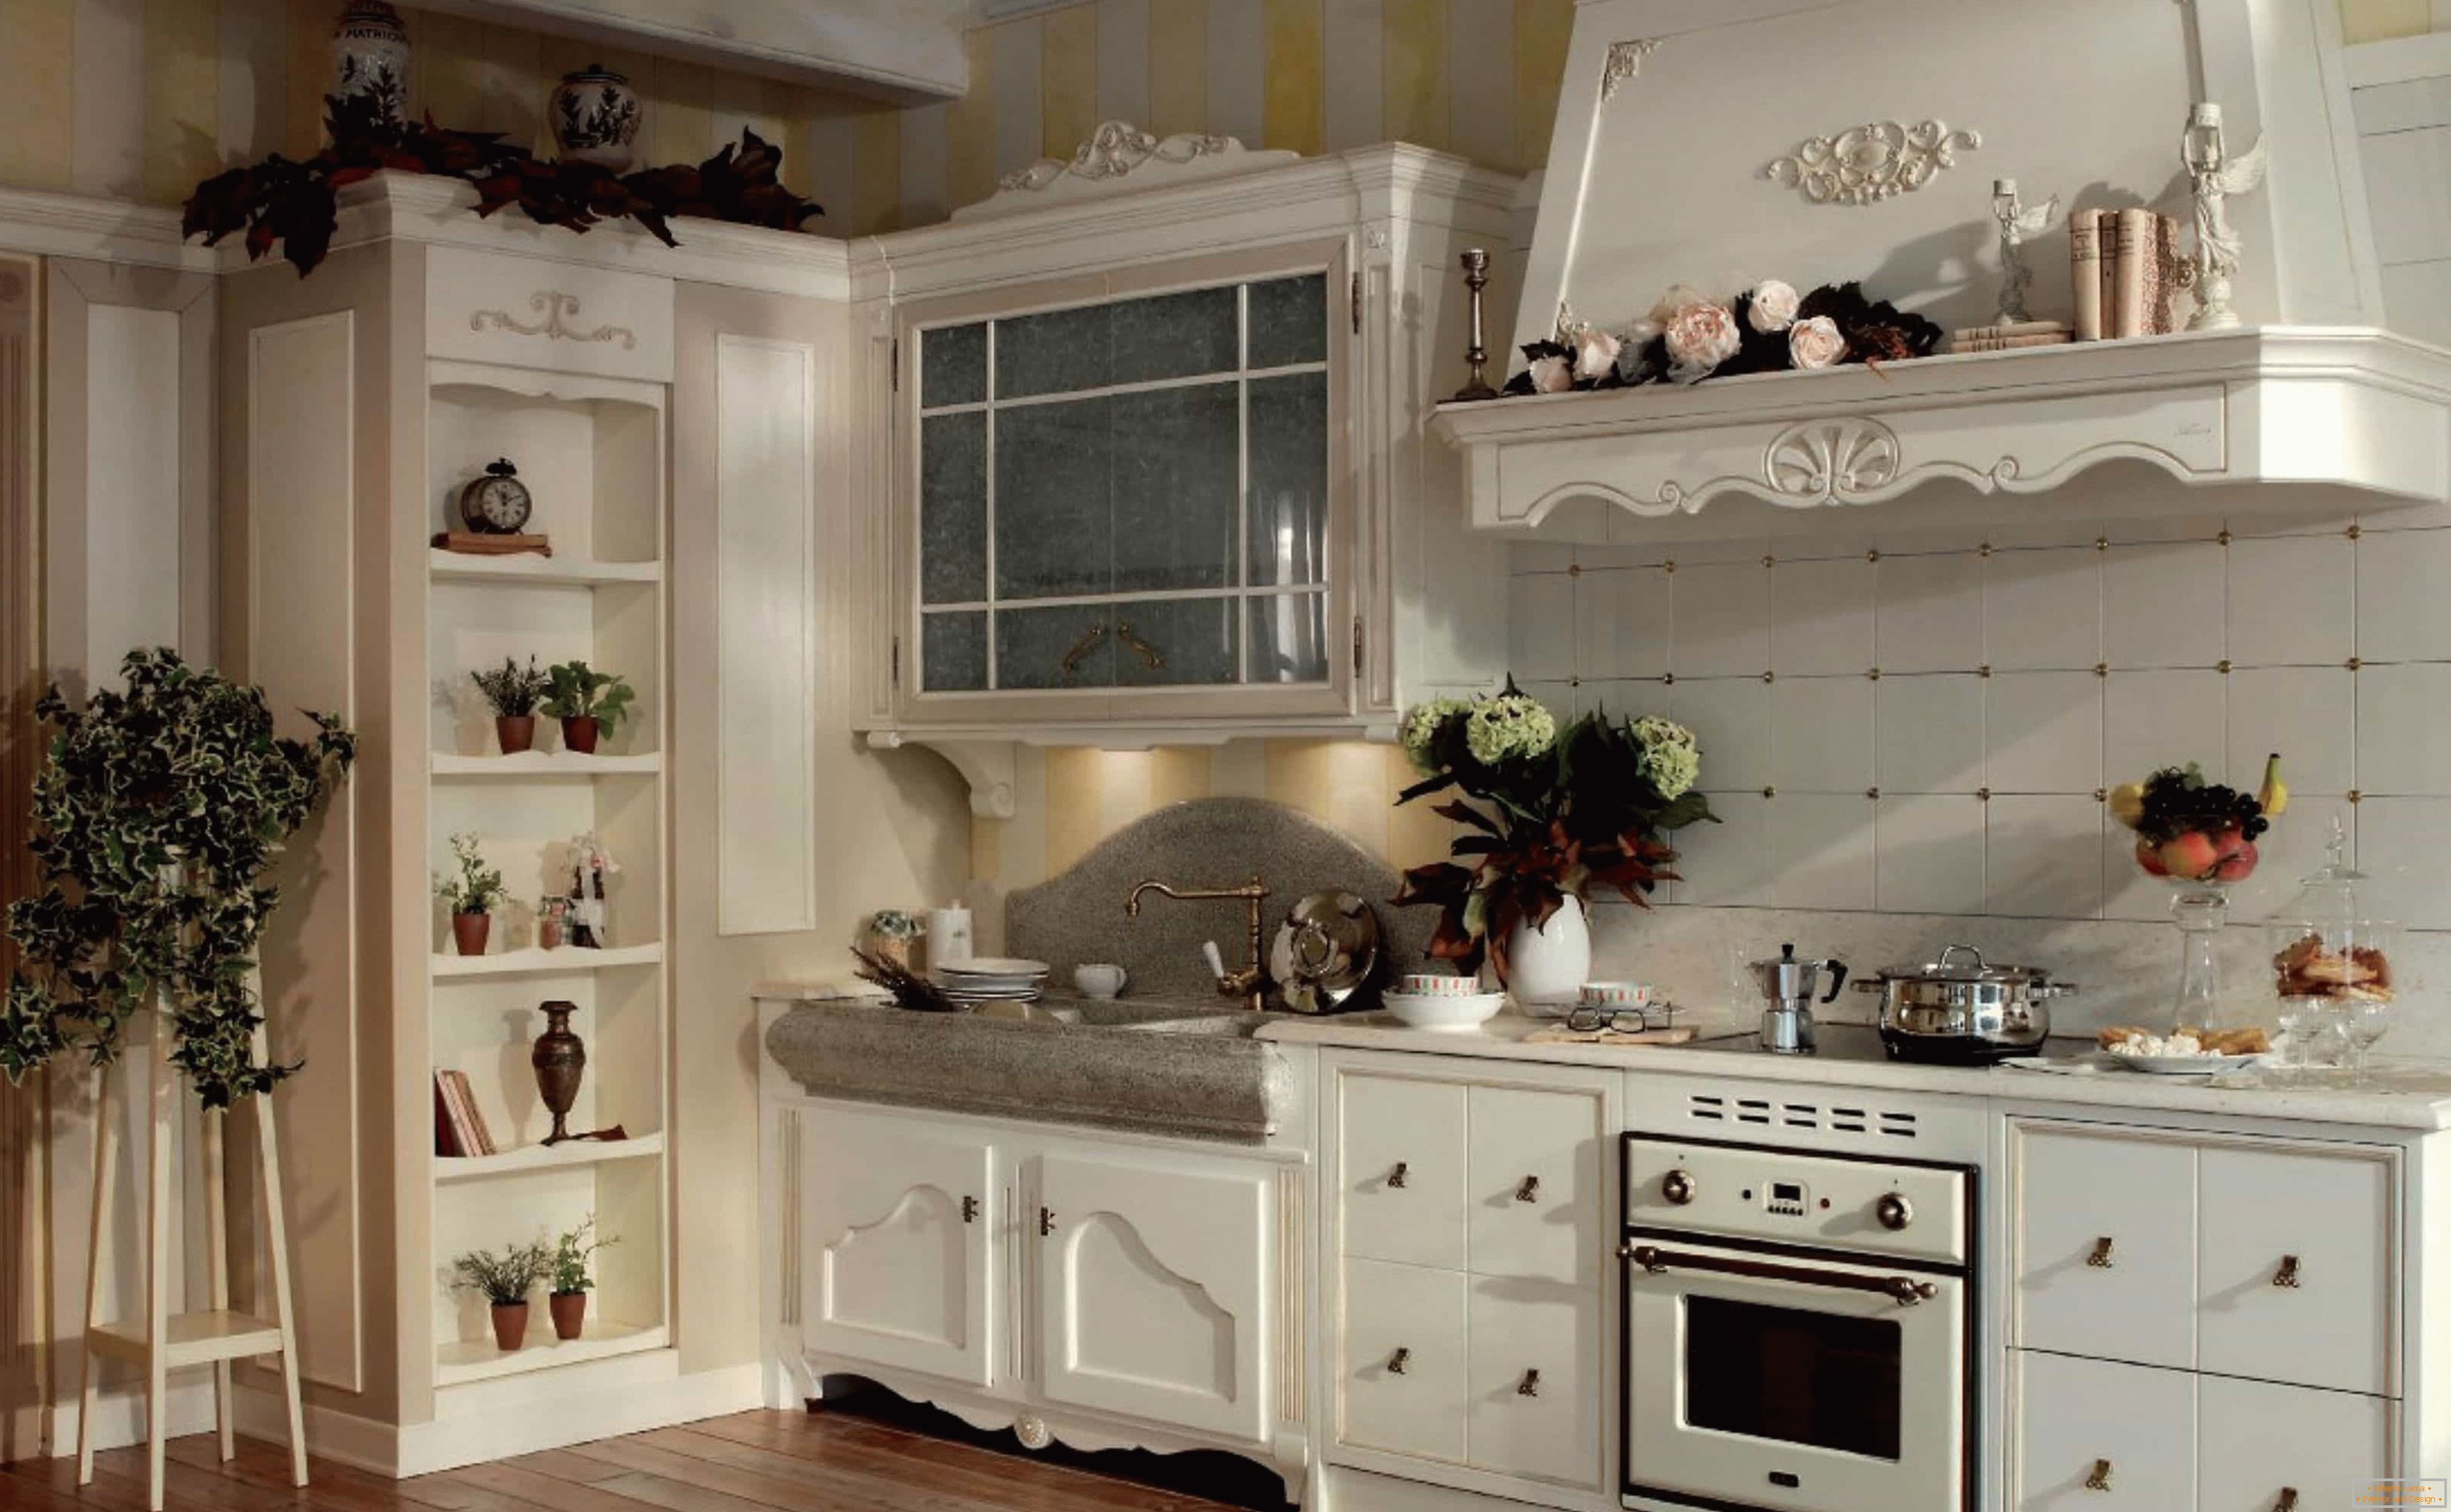 Decor kitchen country style